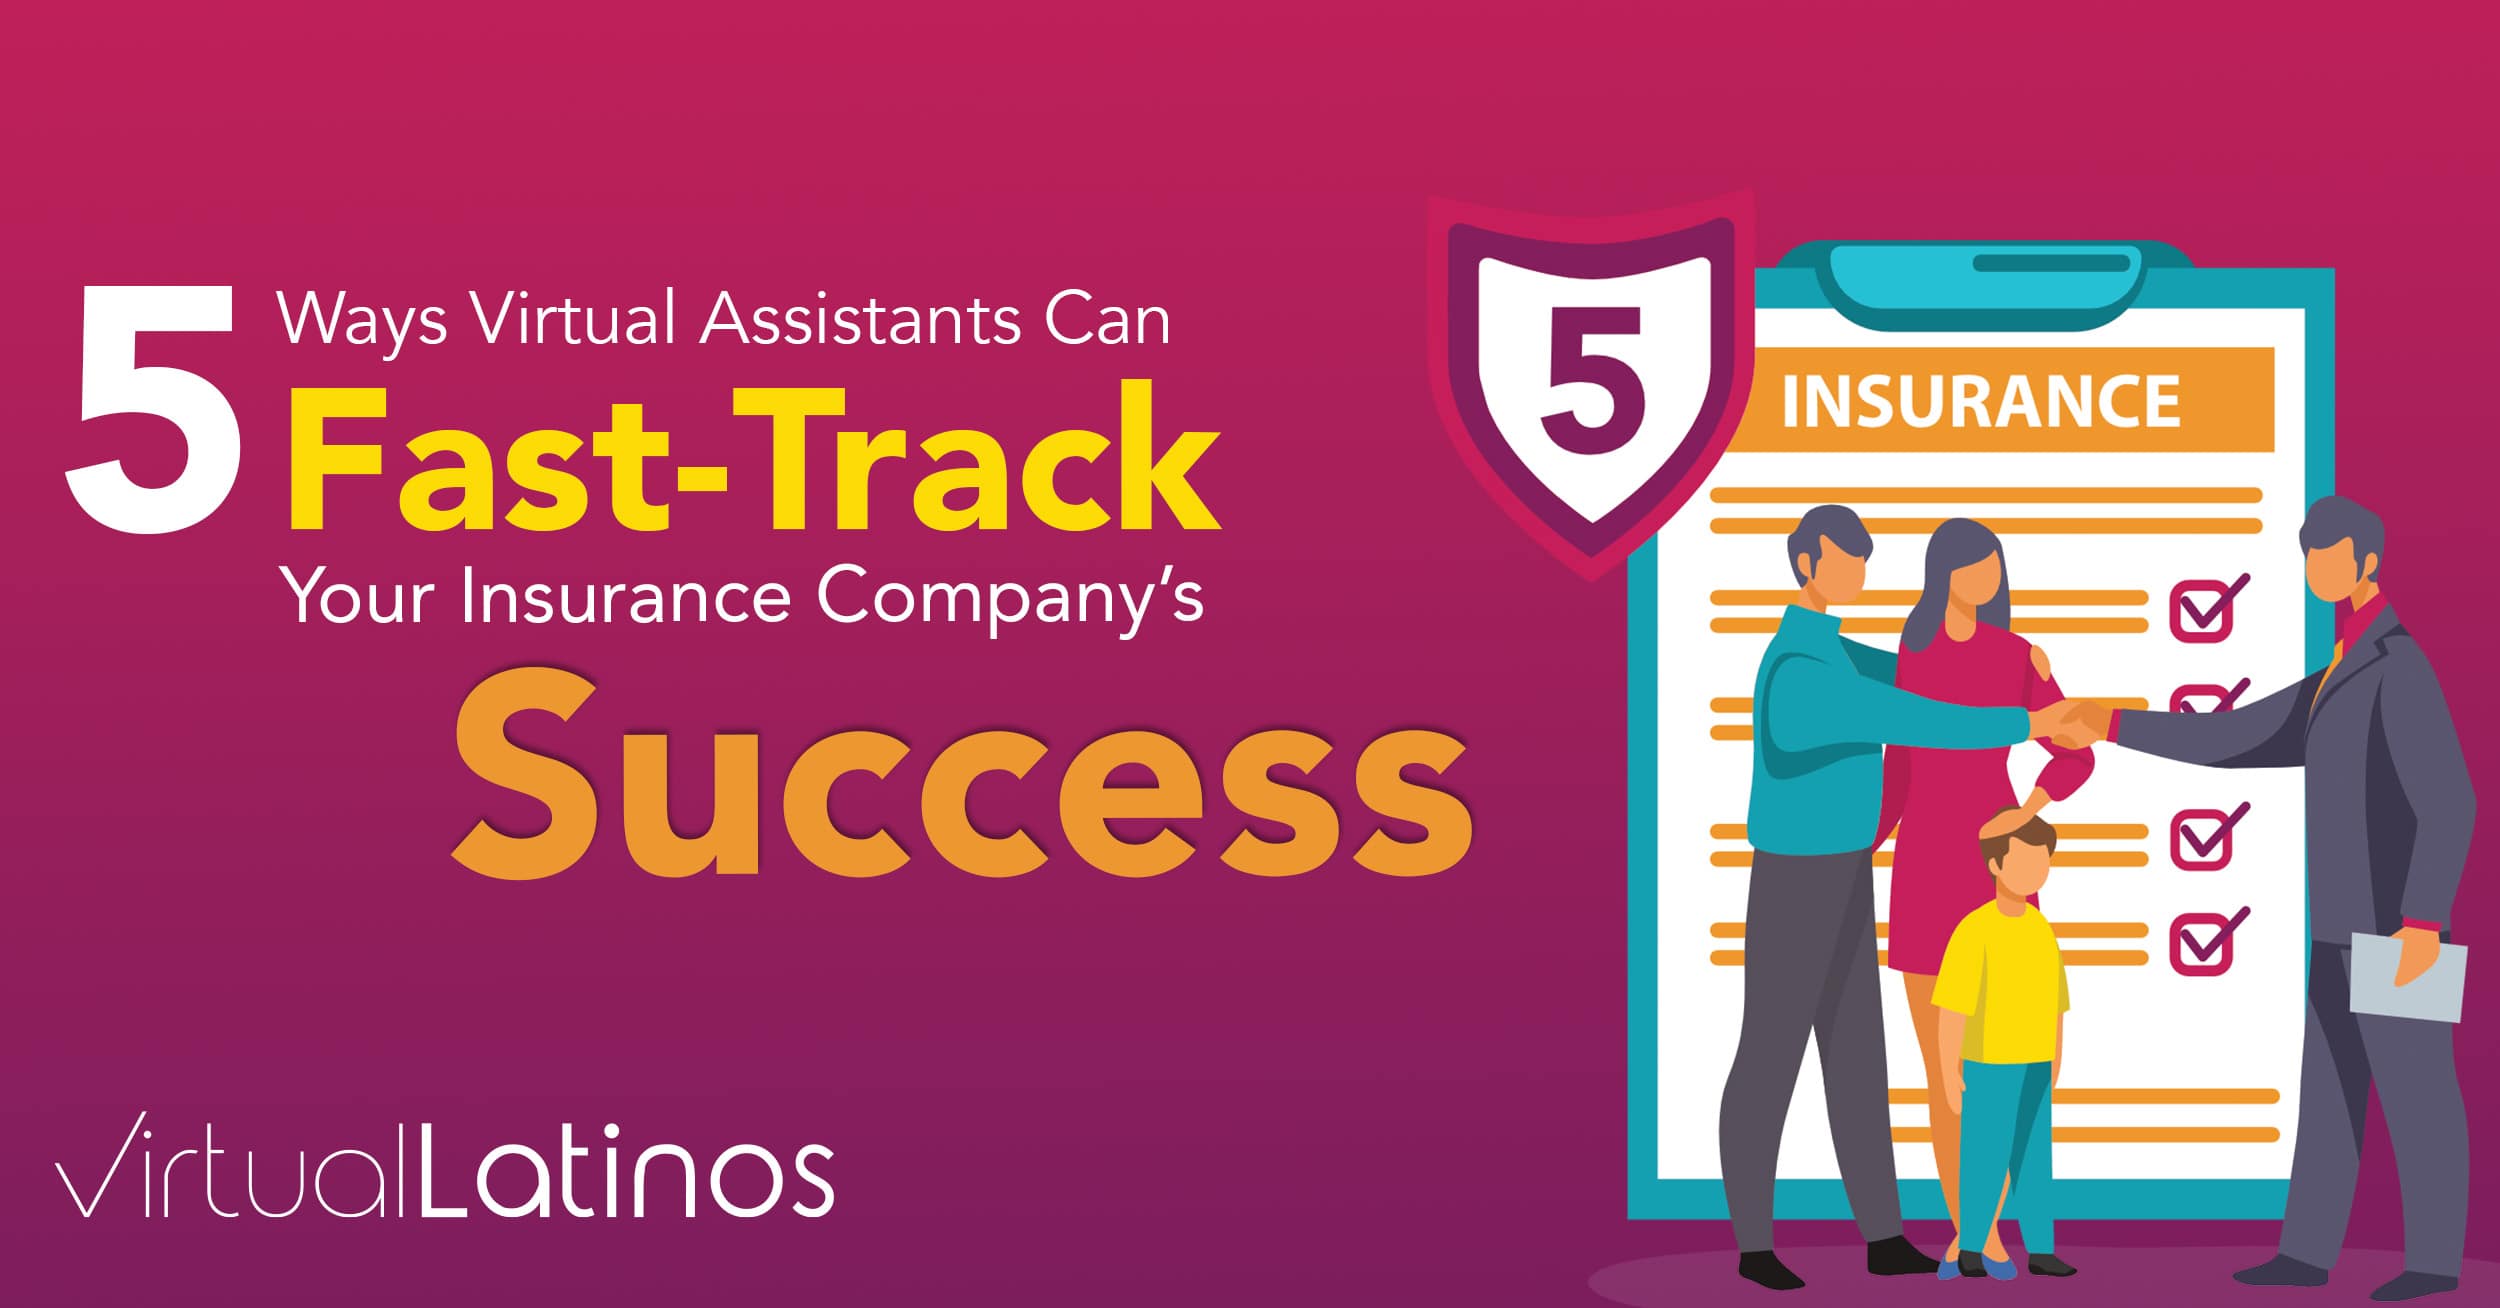 5 Ways Virtual Assistants Can Fast-Track Your Insurance Company’s Success